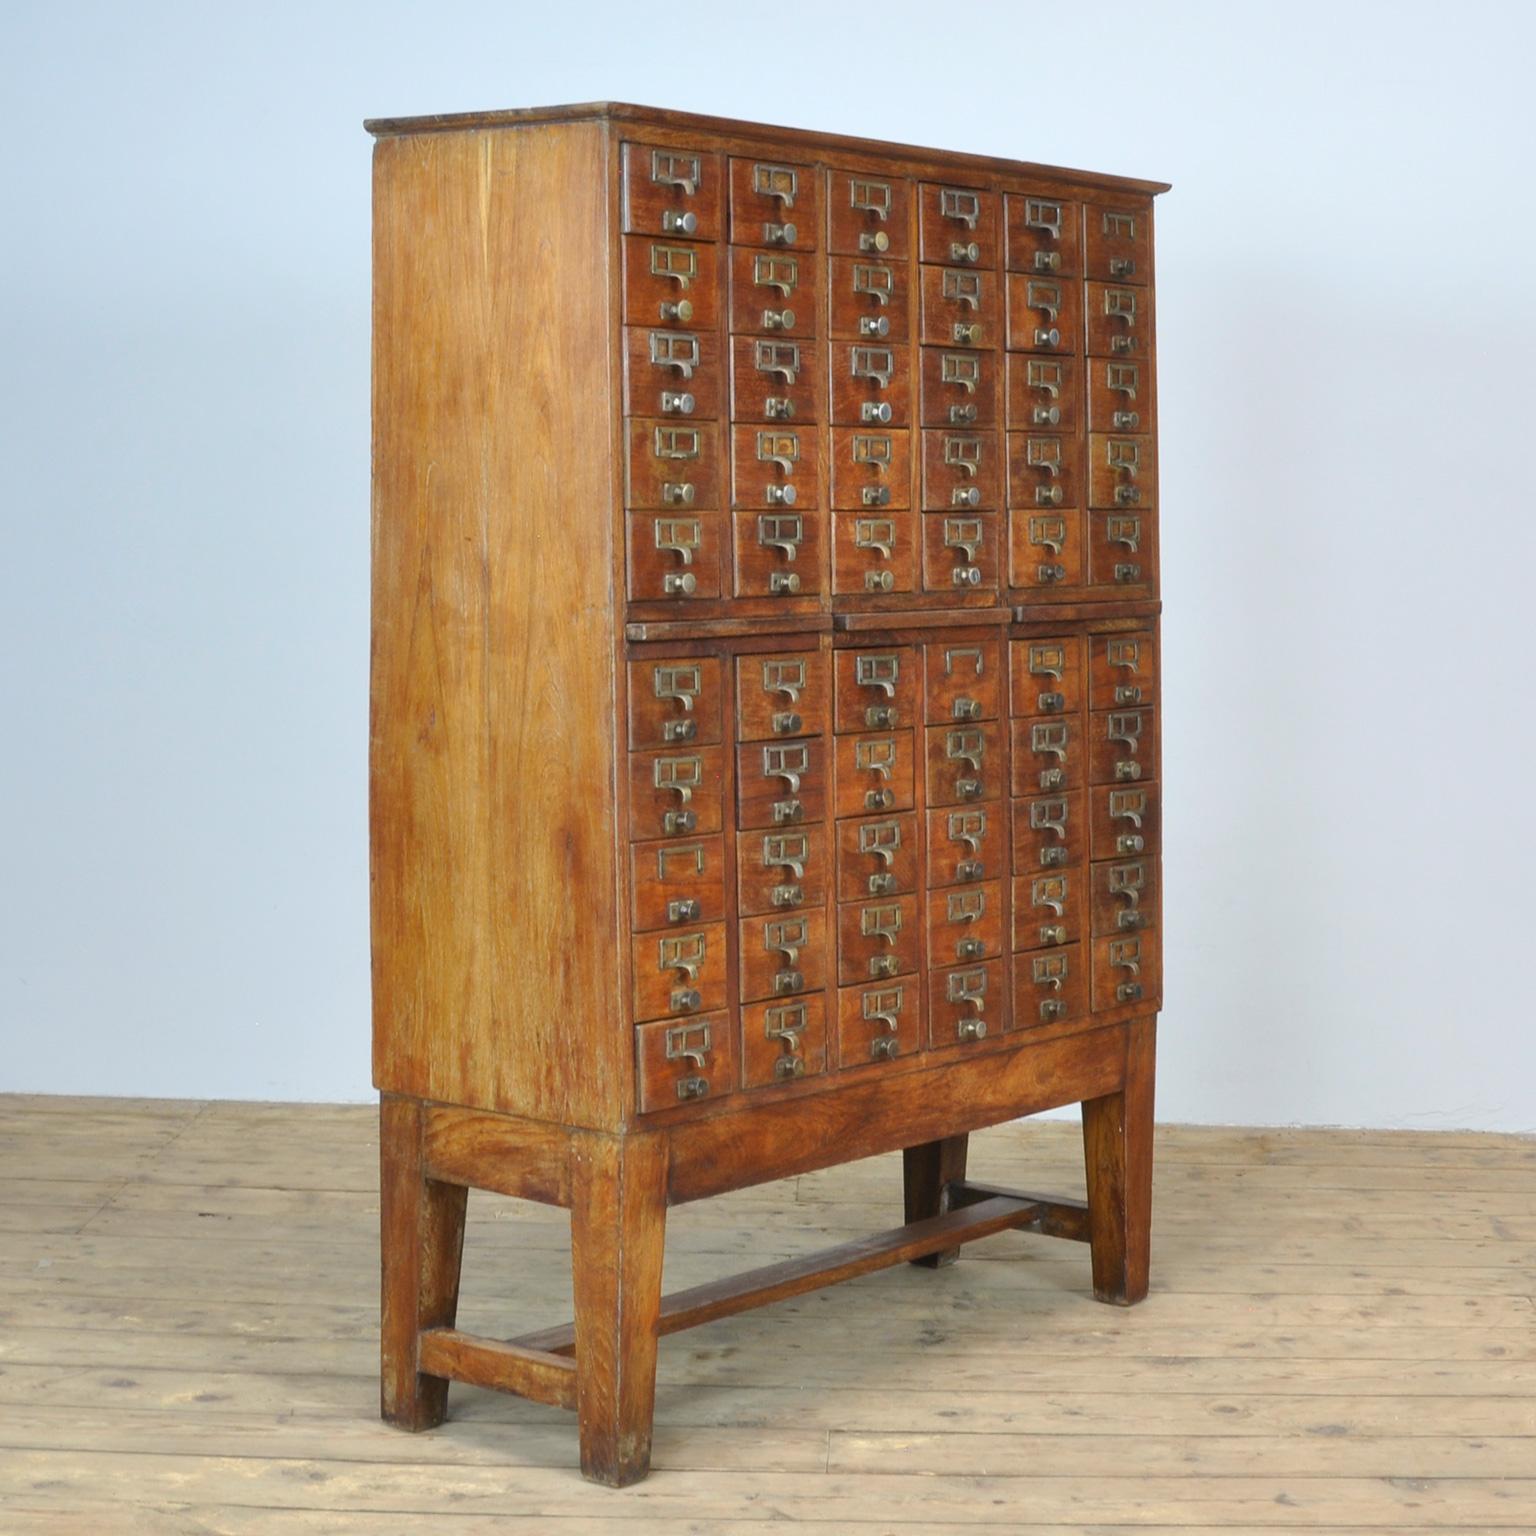 Oak filing cabinet from the 1940s. With 60 drawers with nice brass handles.